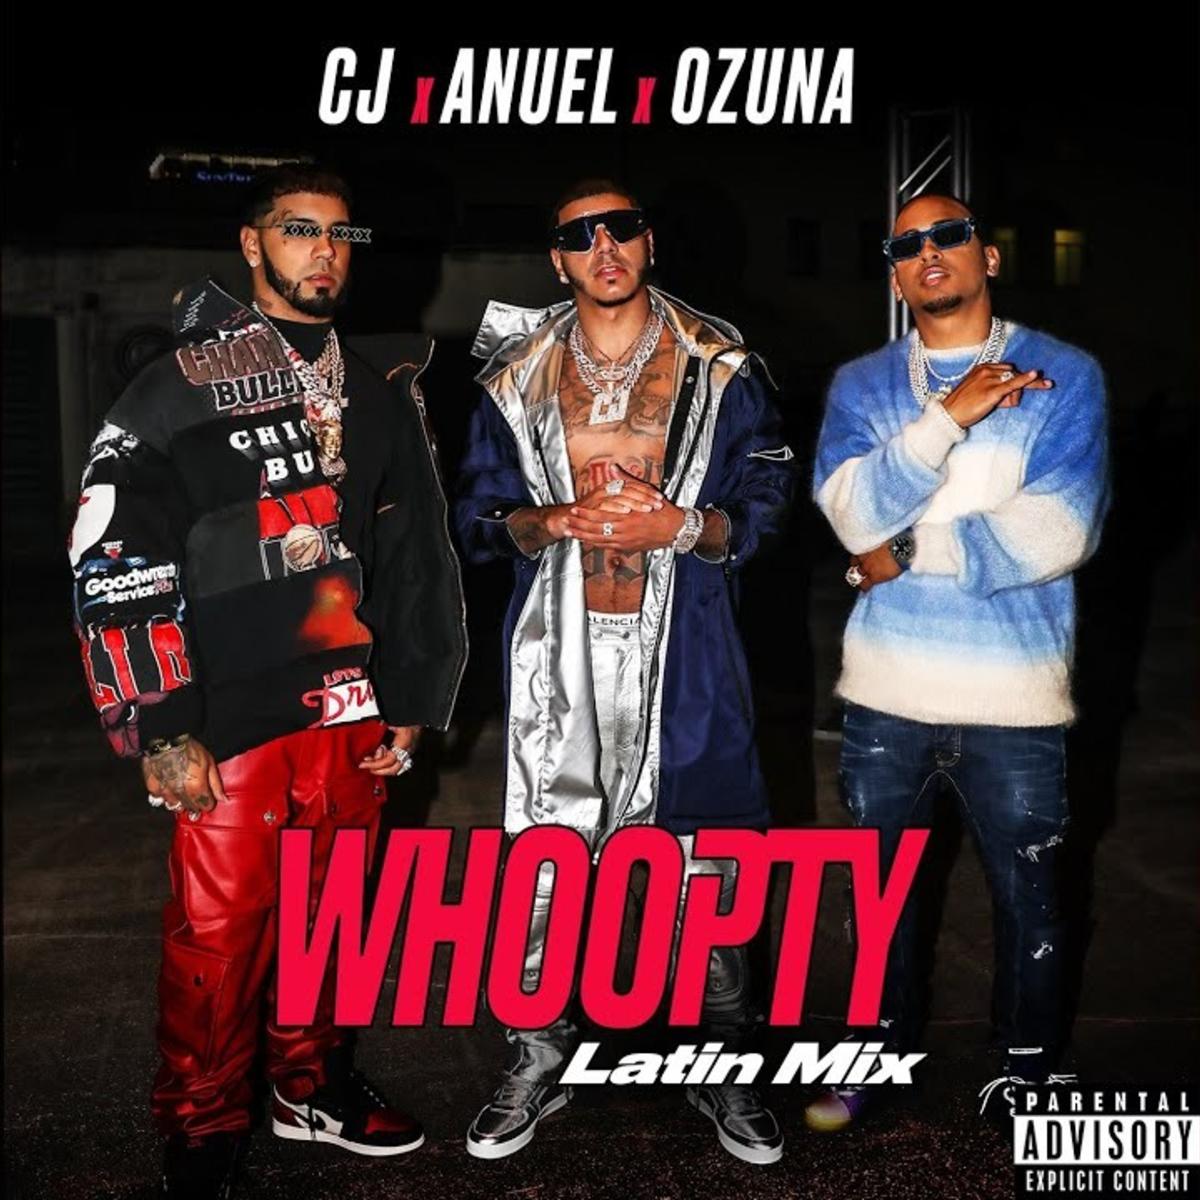 CJ Calls On Anuel AA & Ozuna For A Latin Remix To “Whoopty”